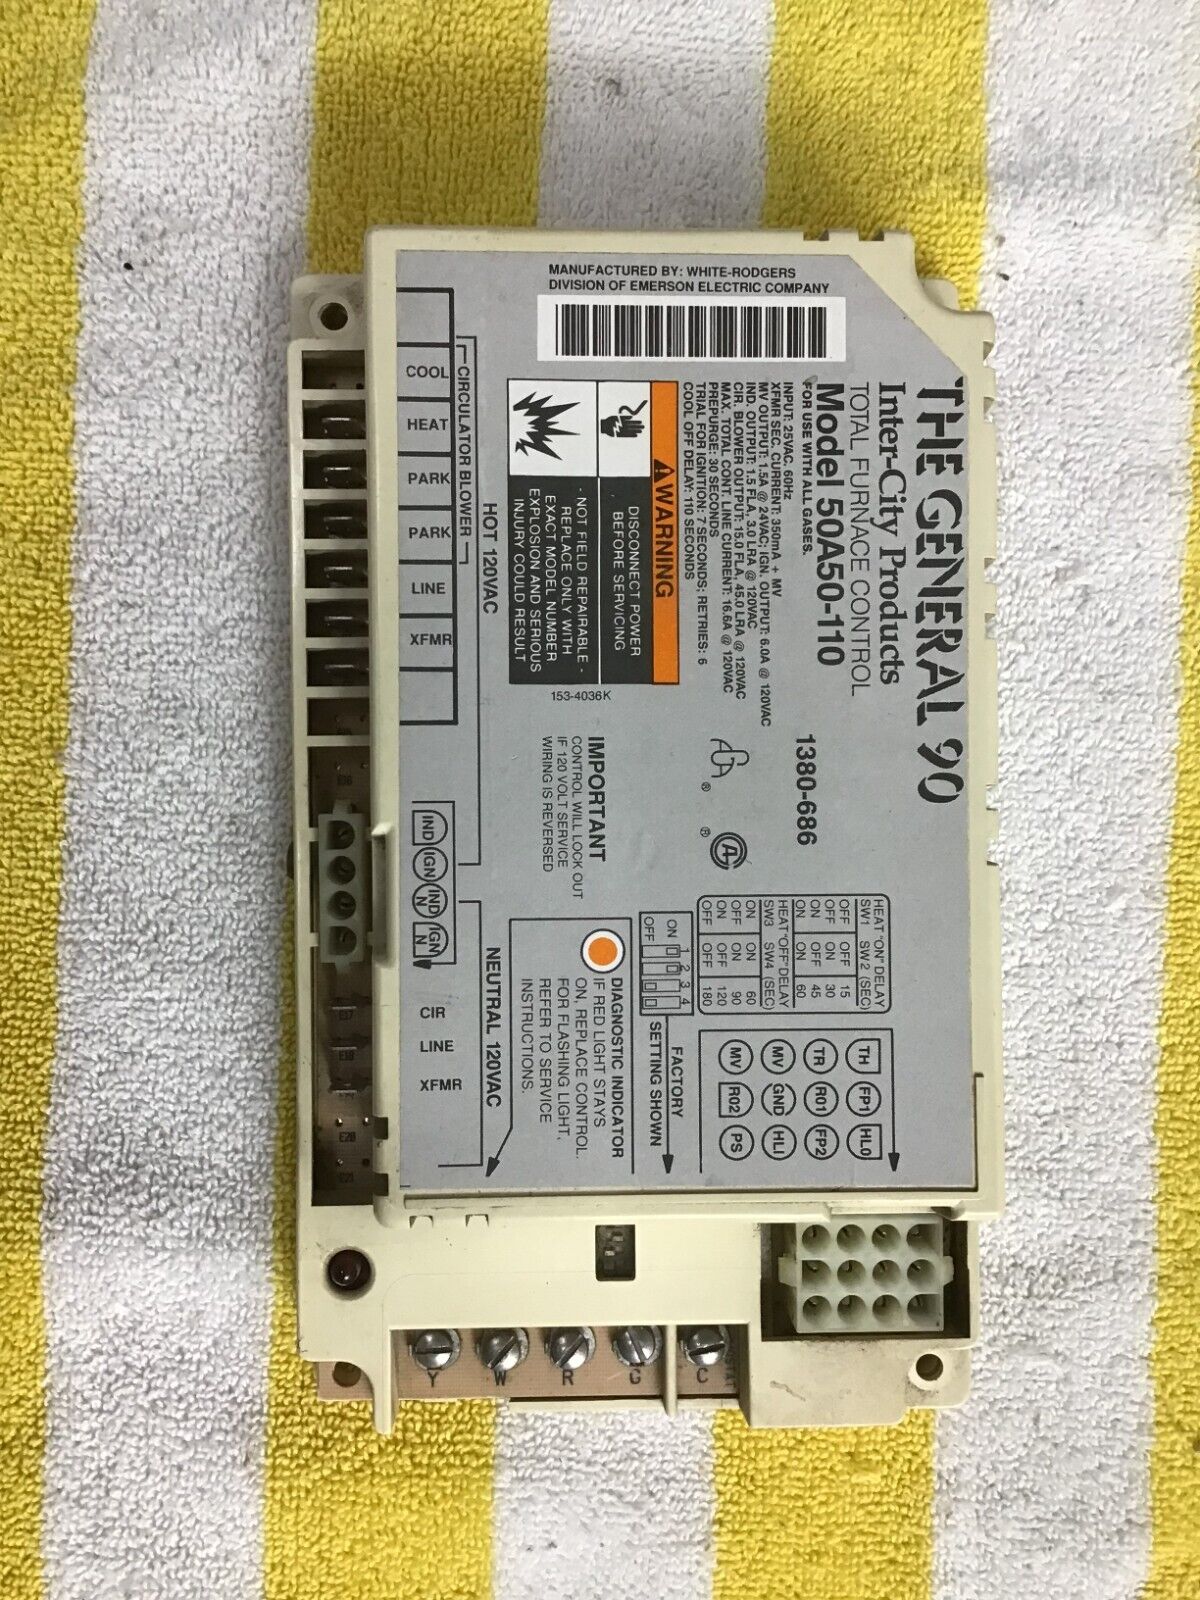 50A50-110 THE GENERAL 90 White Rodgers Total Furnace Control Board 